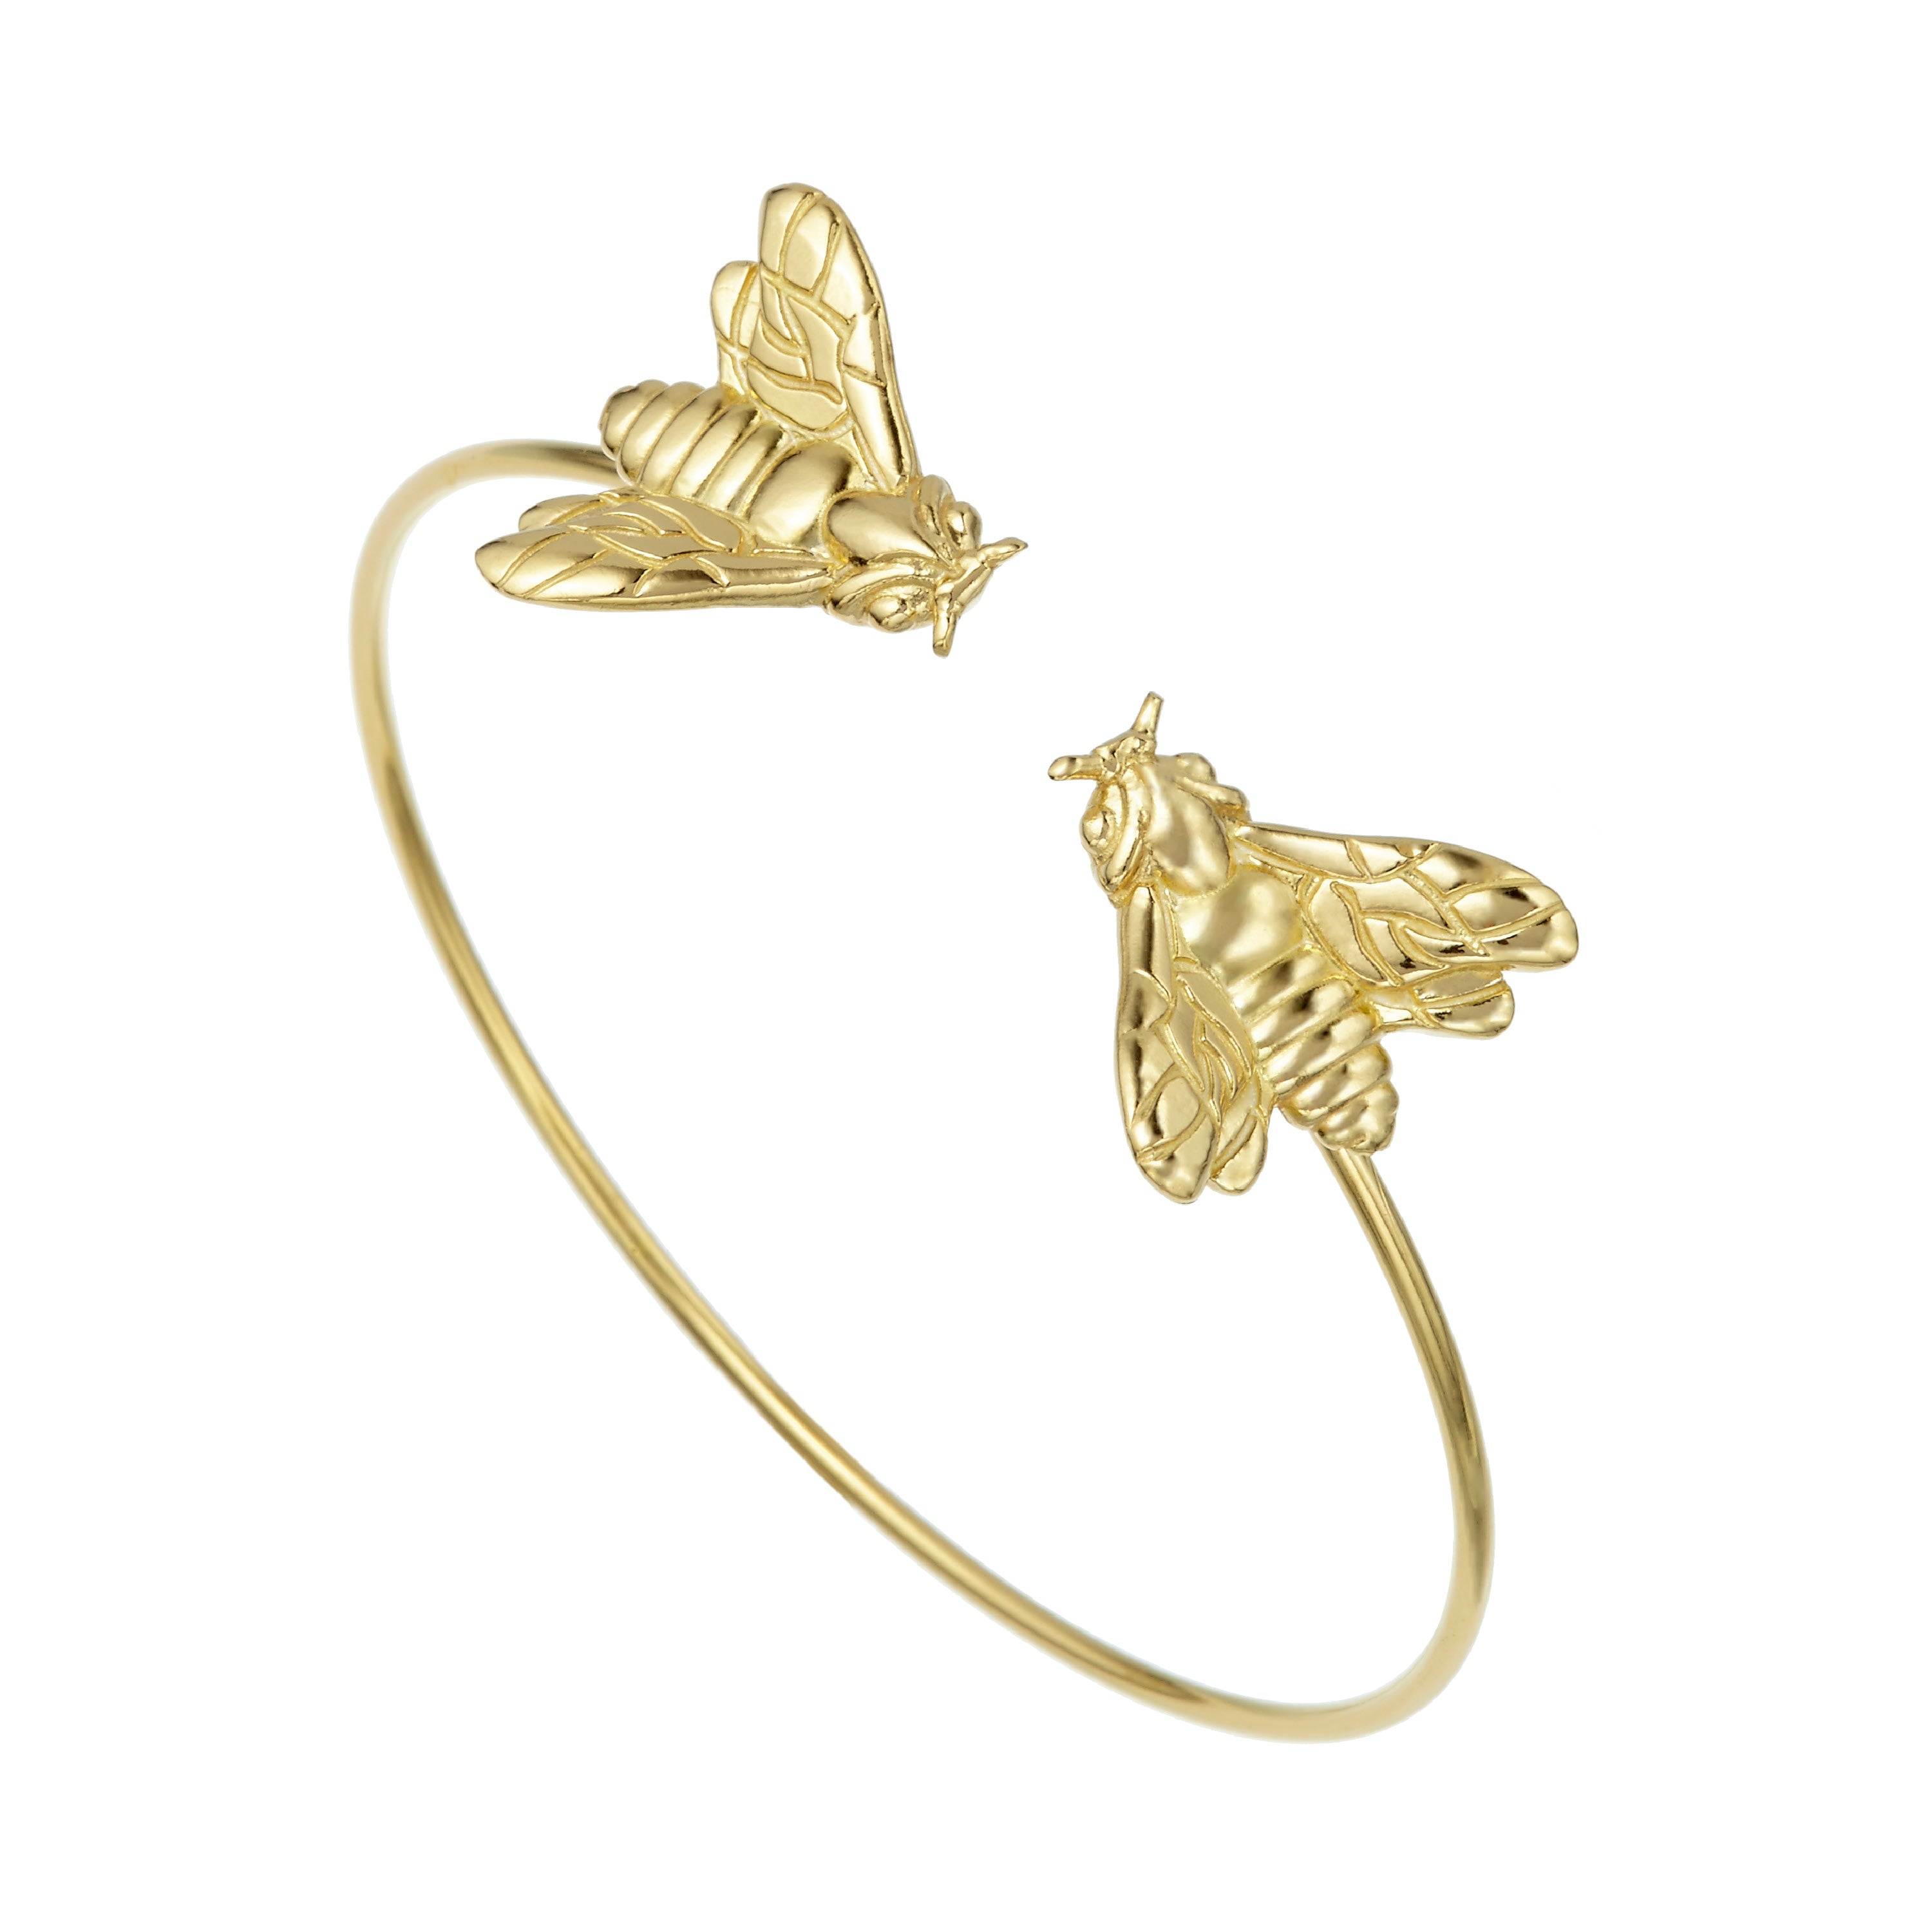 Bee Queen Bracelet with Two Large Bees